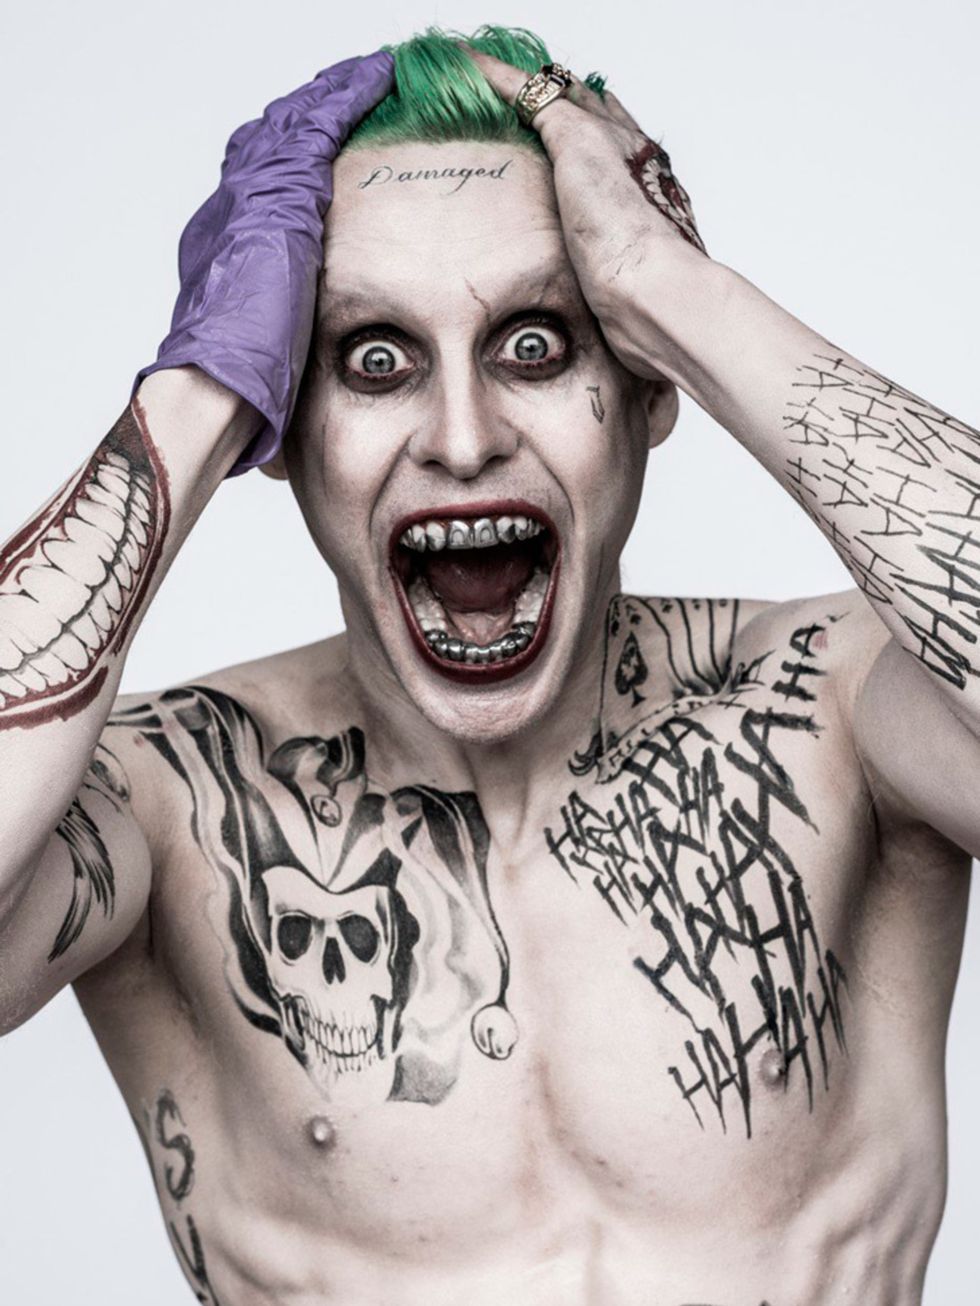 Jared Leto as Joker in upcoming Suicide Squad